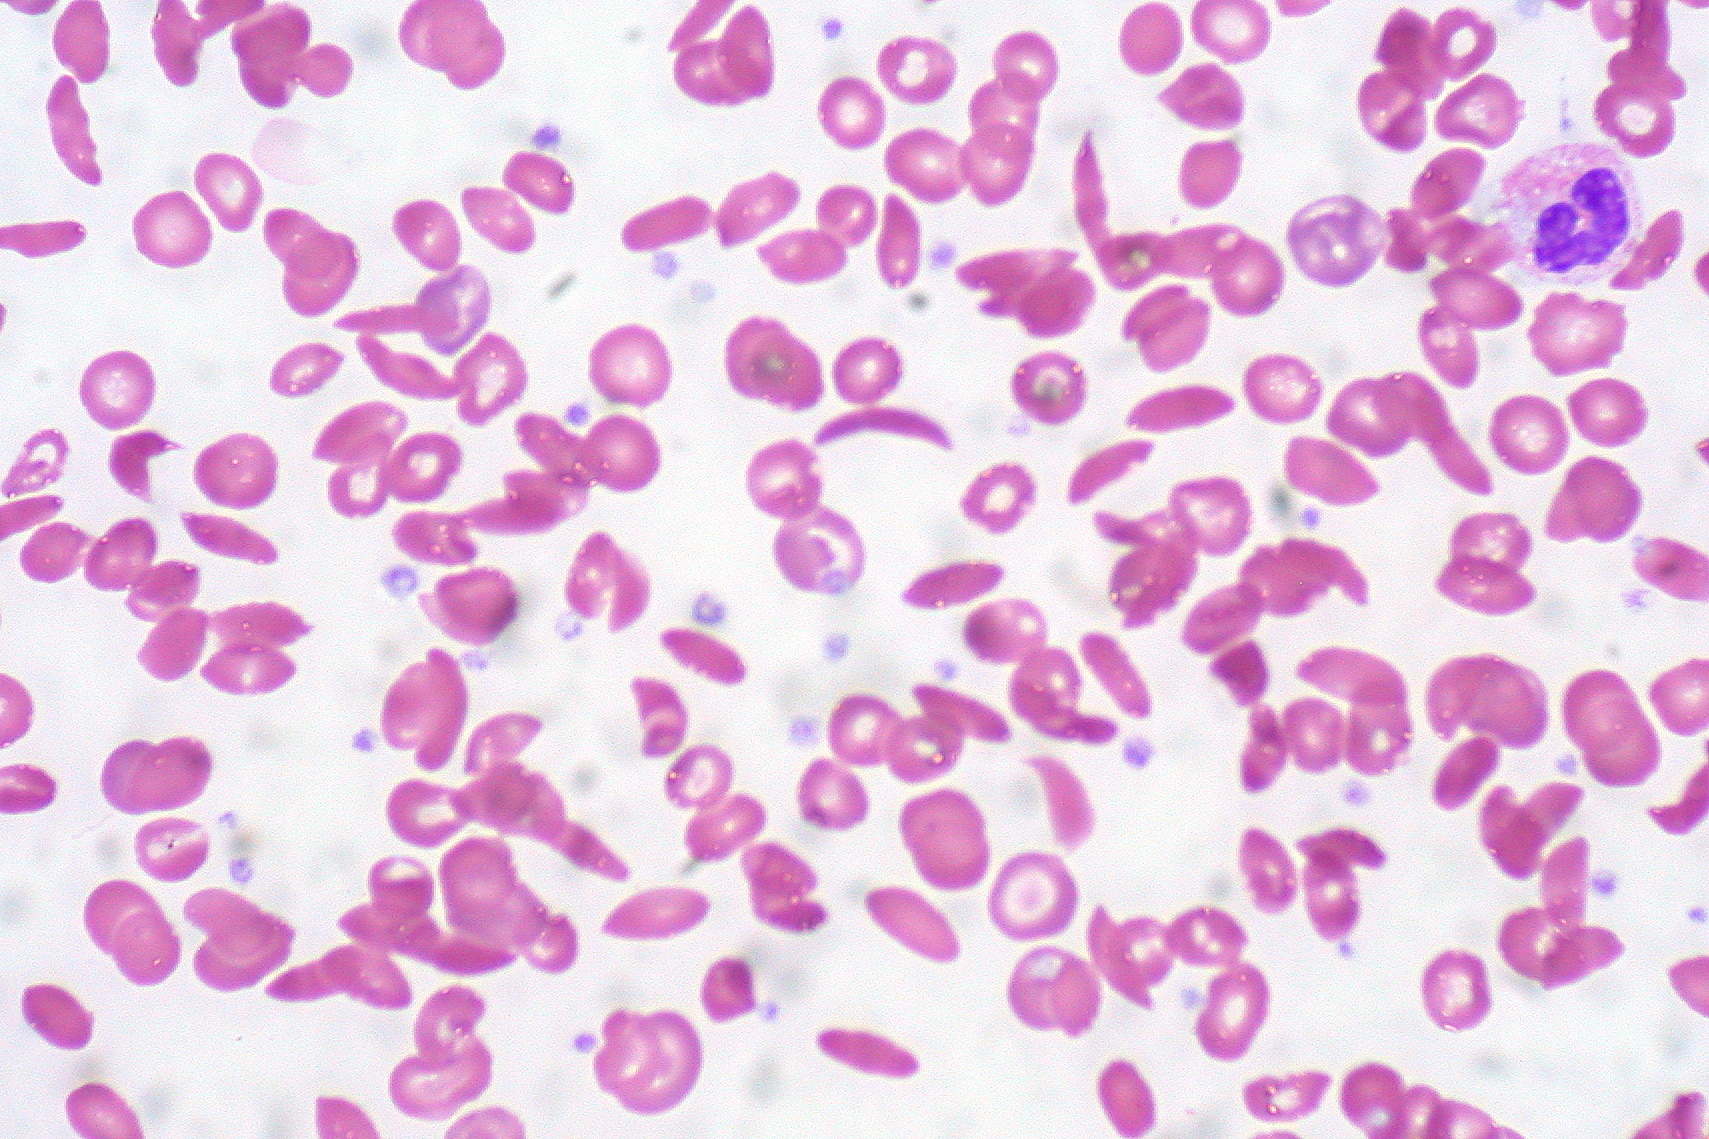 What's Causing Heart Complications in Sickle Cell Anemia Pat